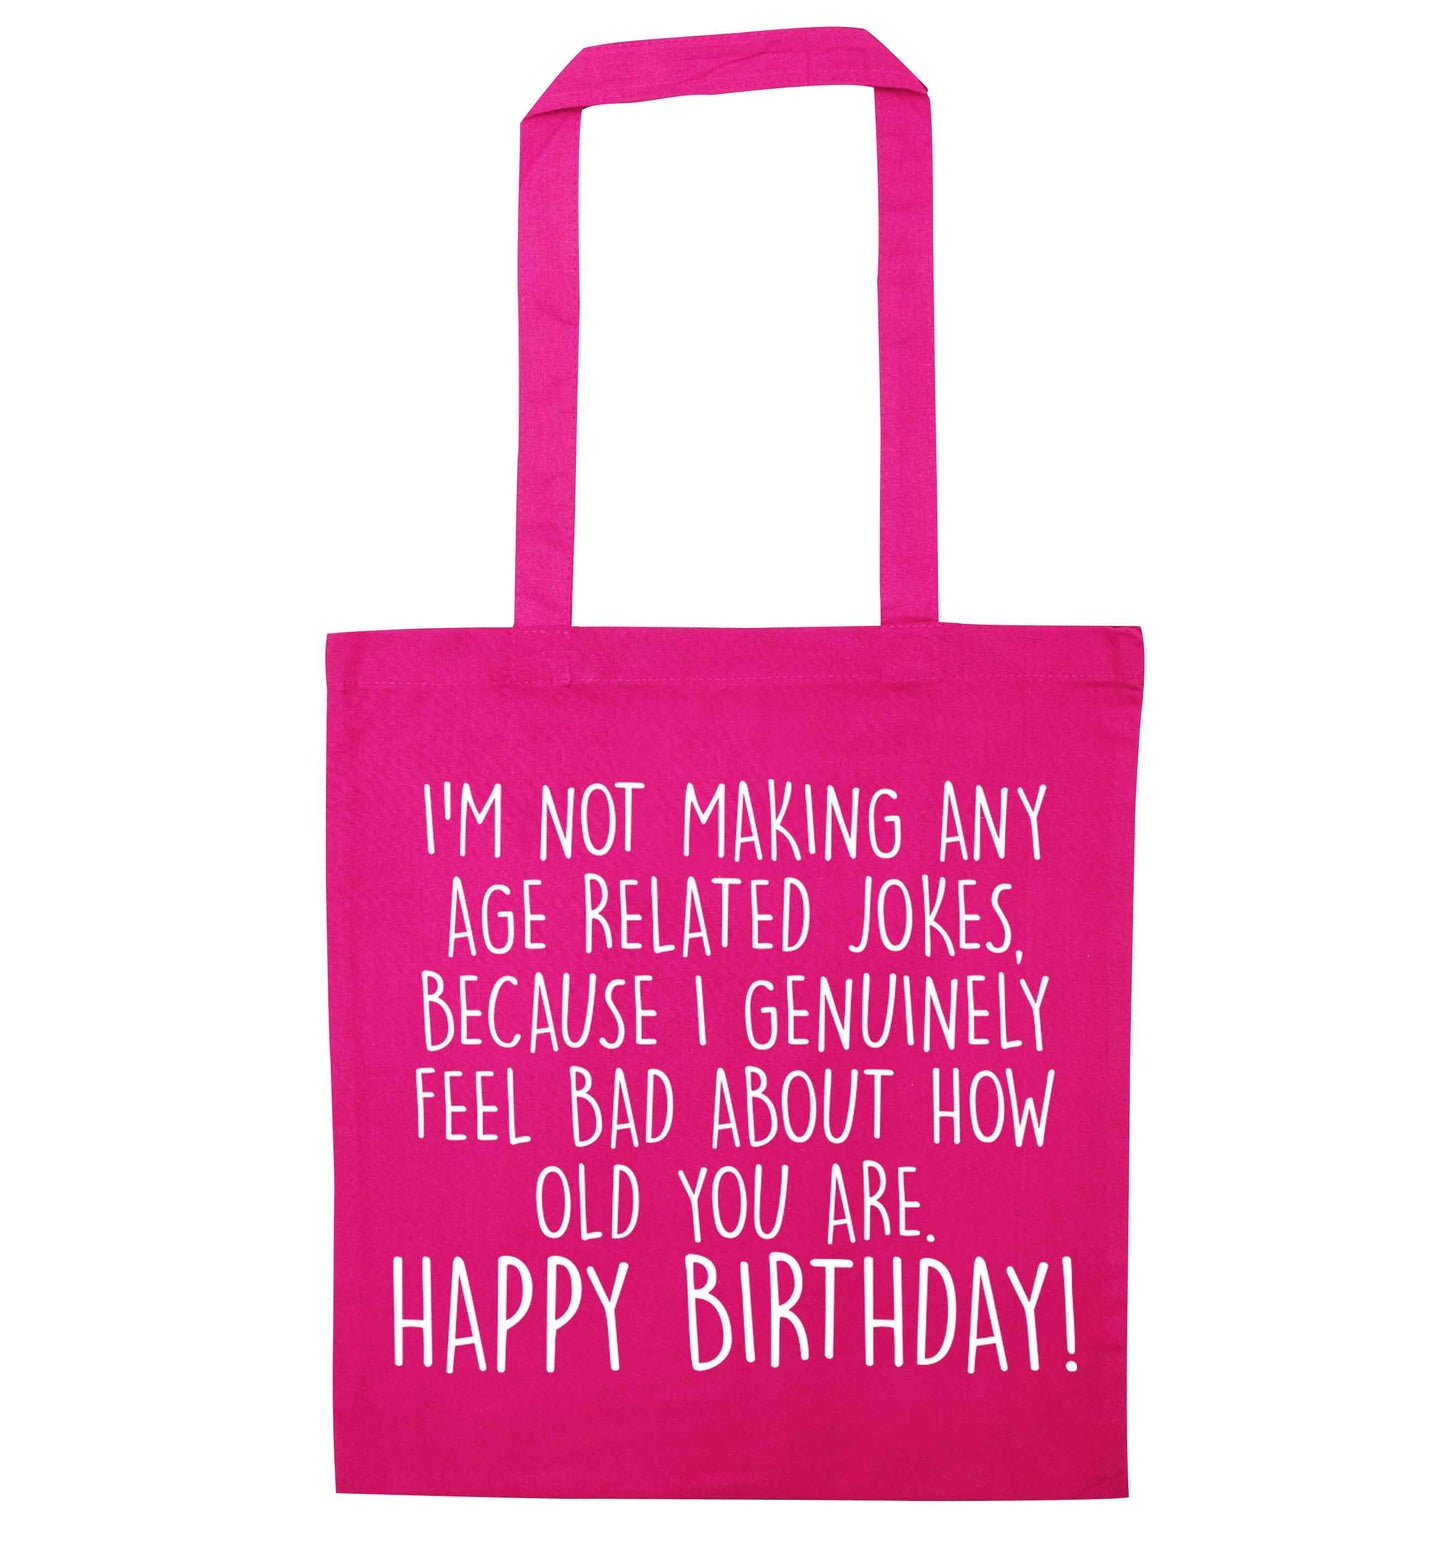 I'm not making any age related jokes because I genuinely feel bad for how old you are pink tote bag